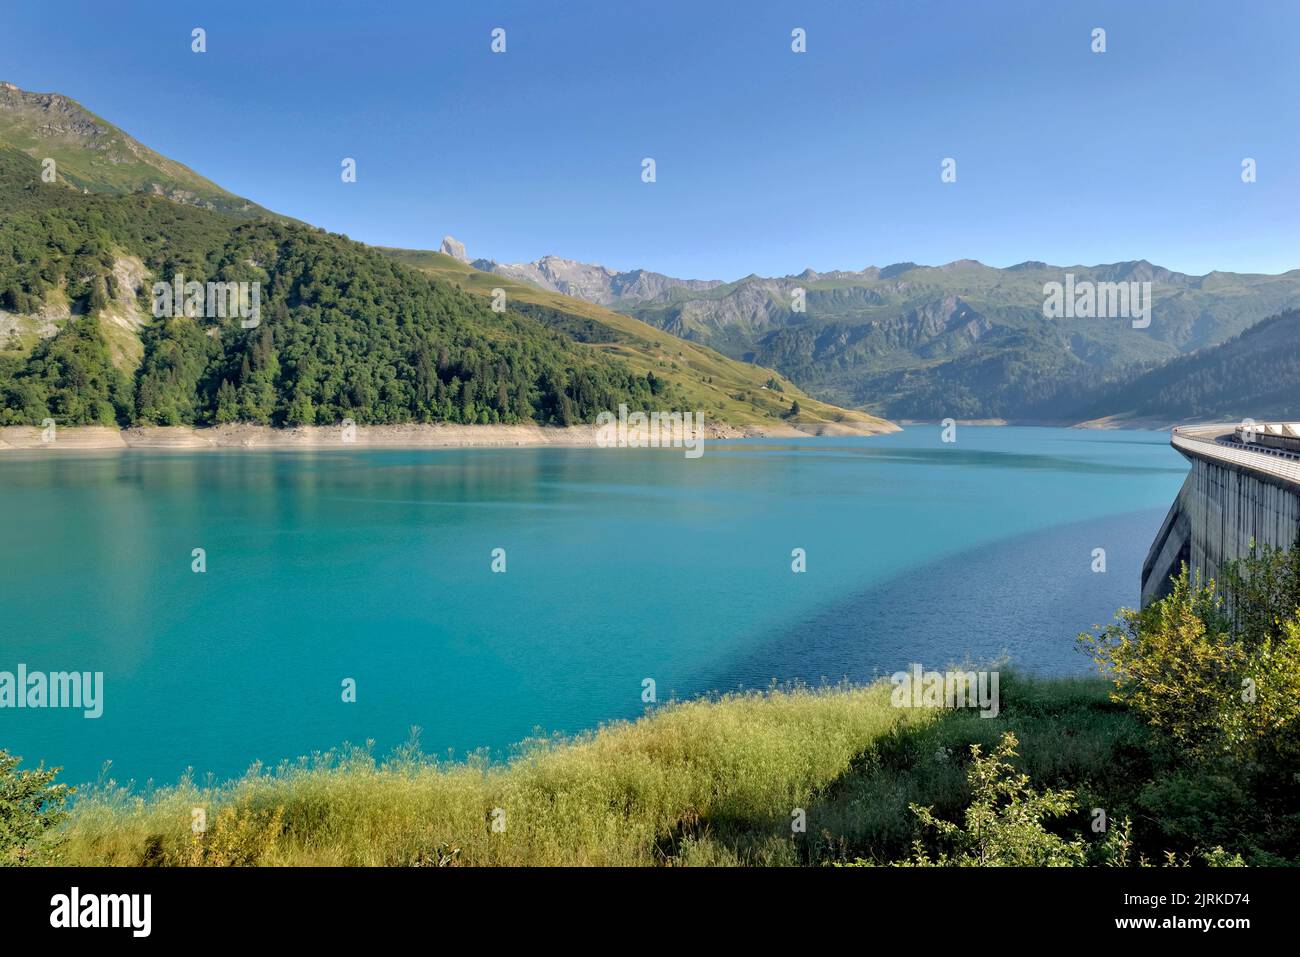 the roselend dam with turquoise water in a mountainous landscape in France Stock Photo